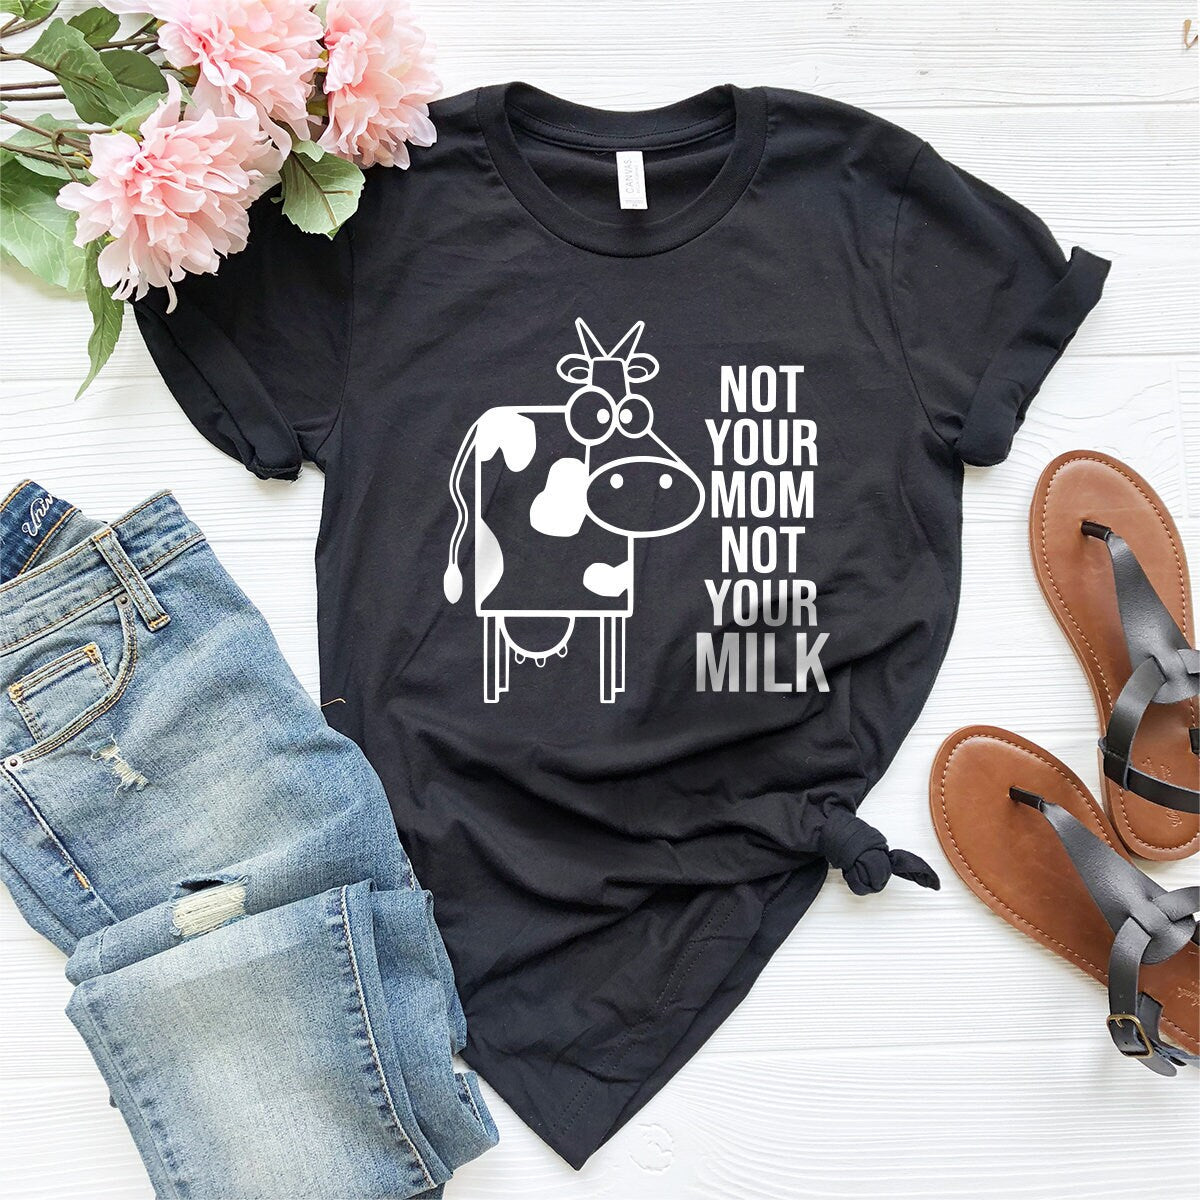 Not Your Mom Not Your Milk T-Shirt,Save Animal Shirt, Vegan Shirt, Vegetarian Shirt, Animal Lover Tee,Gift For Vegan, Animal Rights Tee - Fastdeliverytees.com